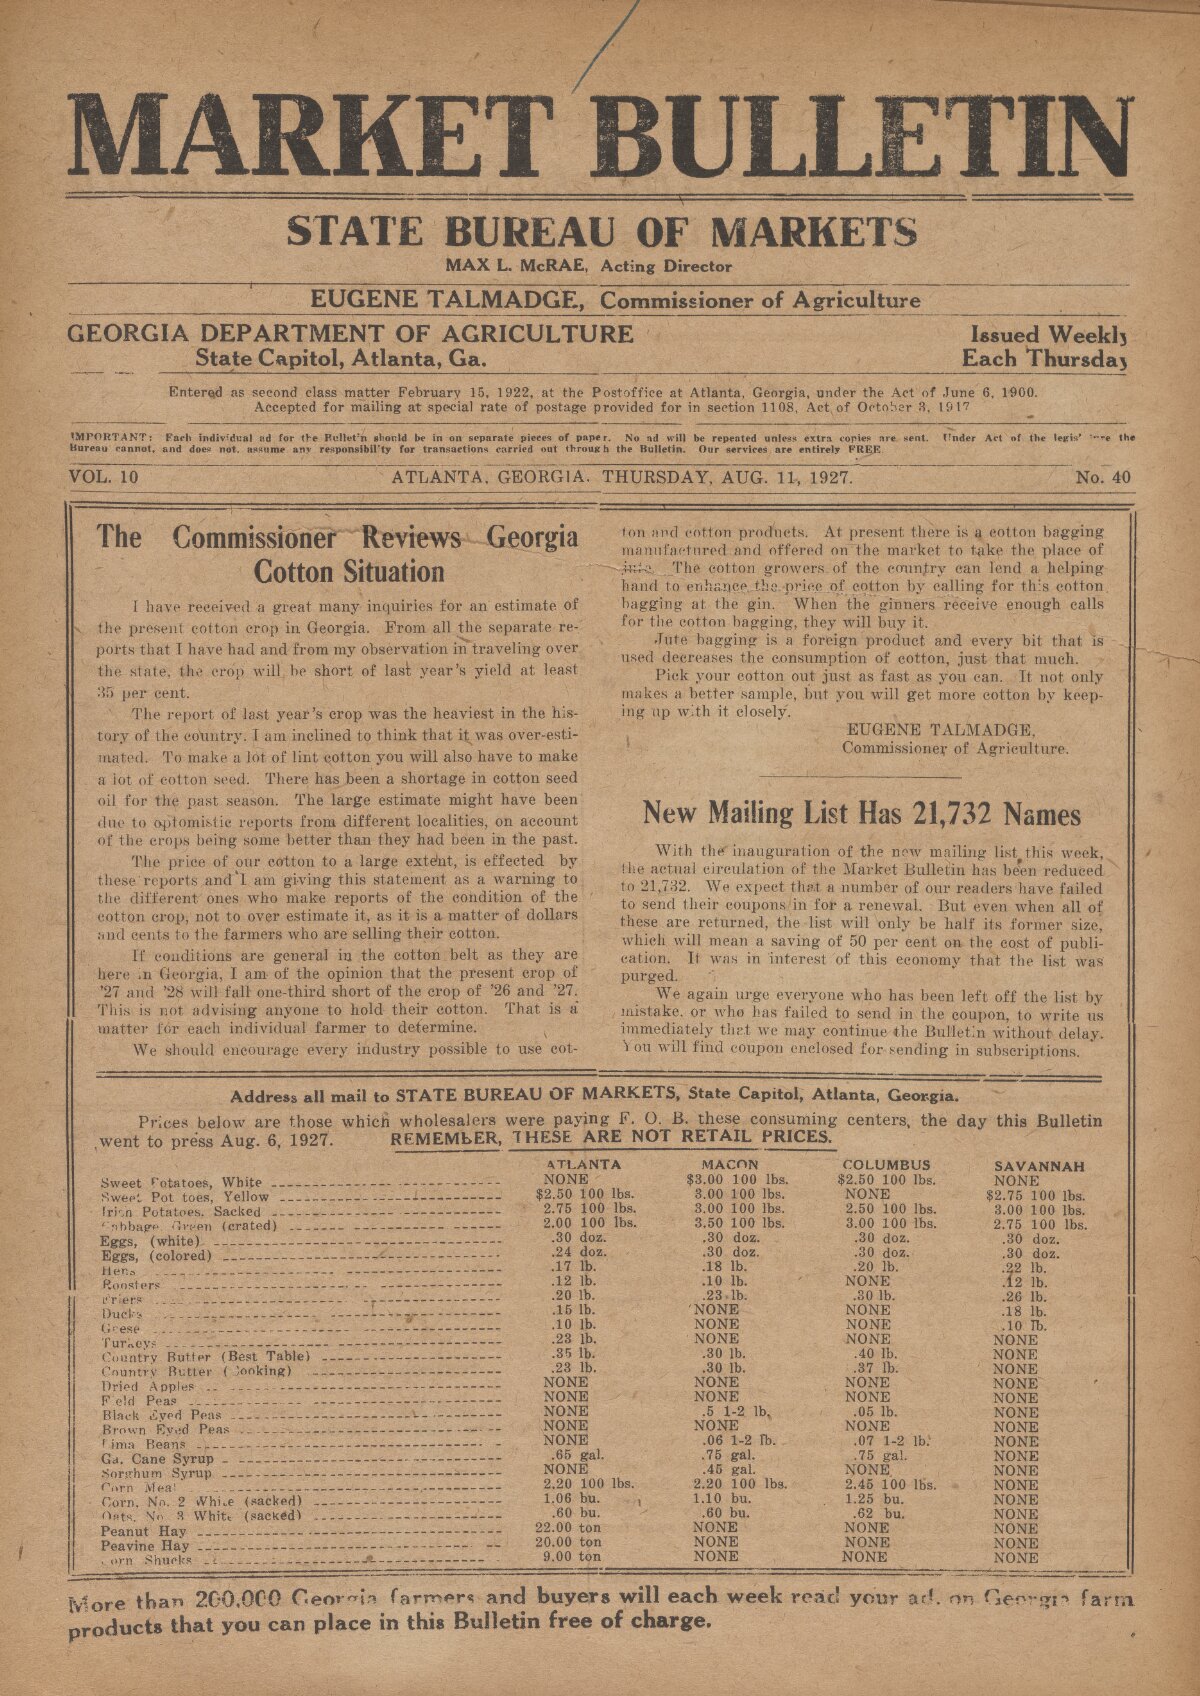 Farmers and consumers market bulletin, 1927 August 11 picture